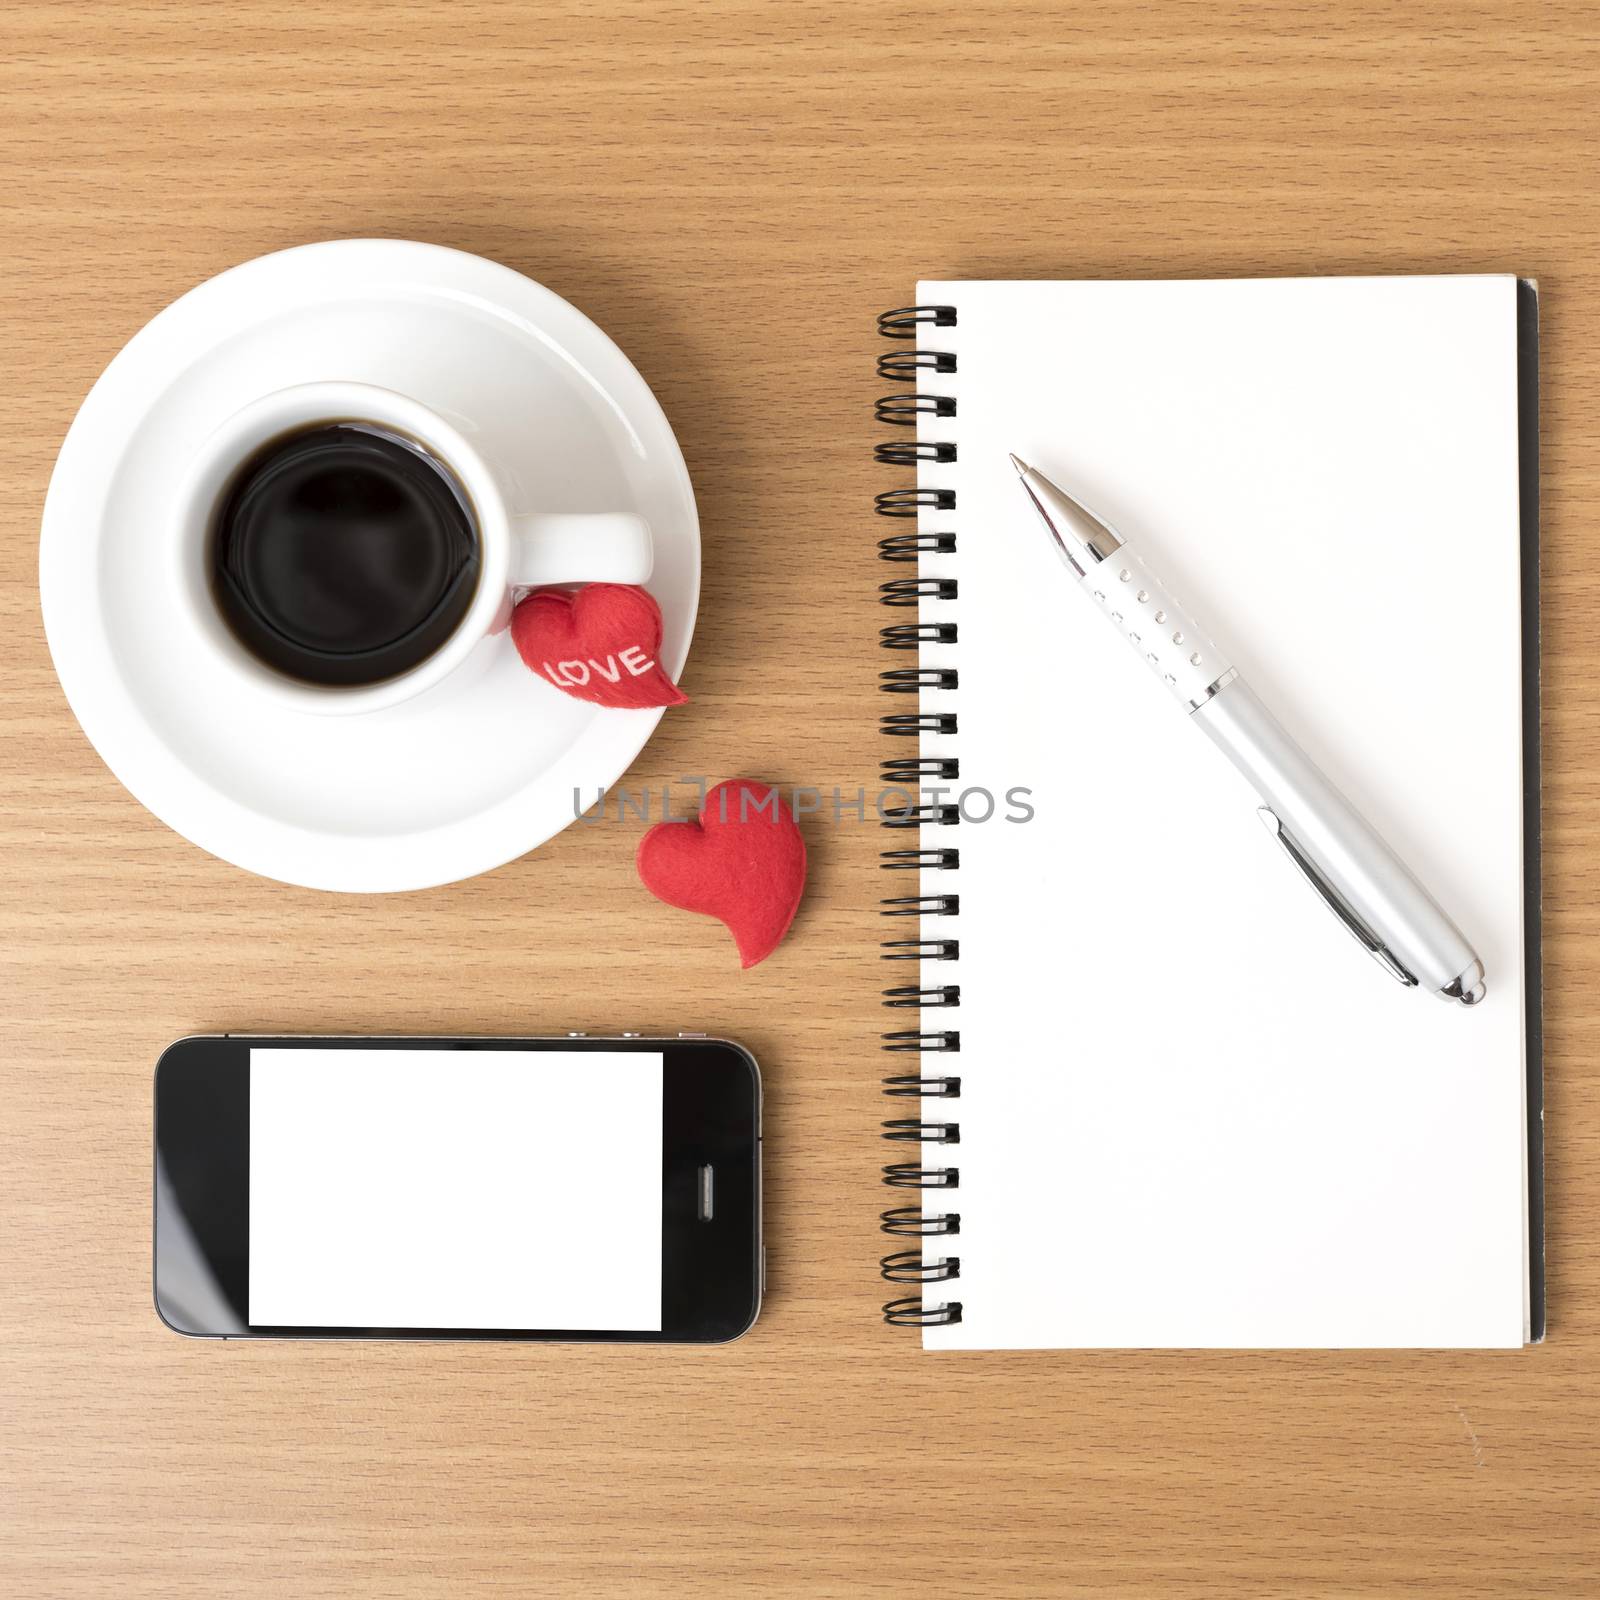 coffee,phone,notepad and heart on wood table background